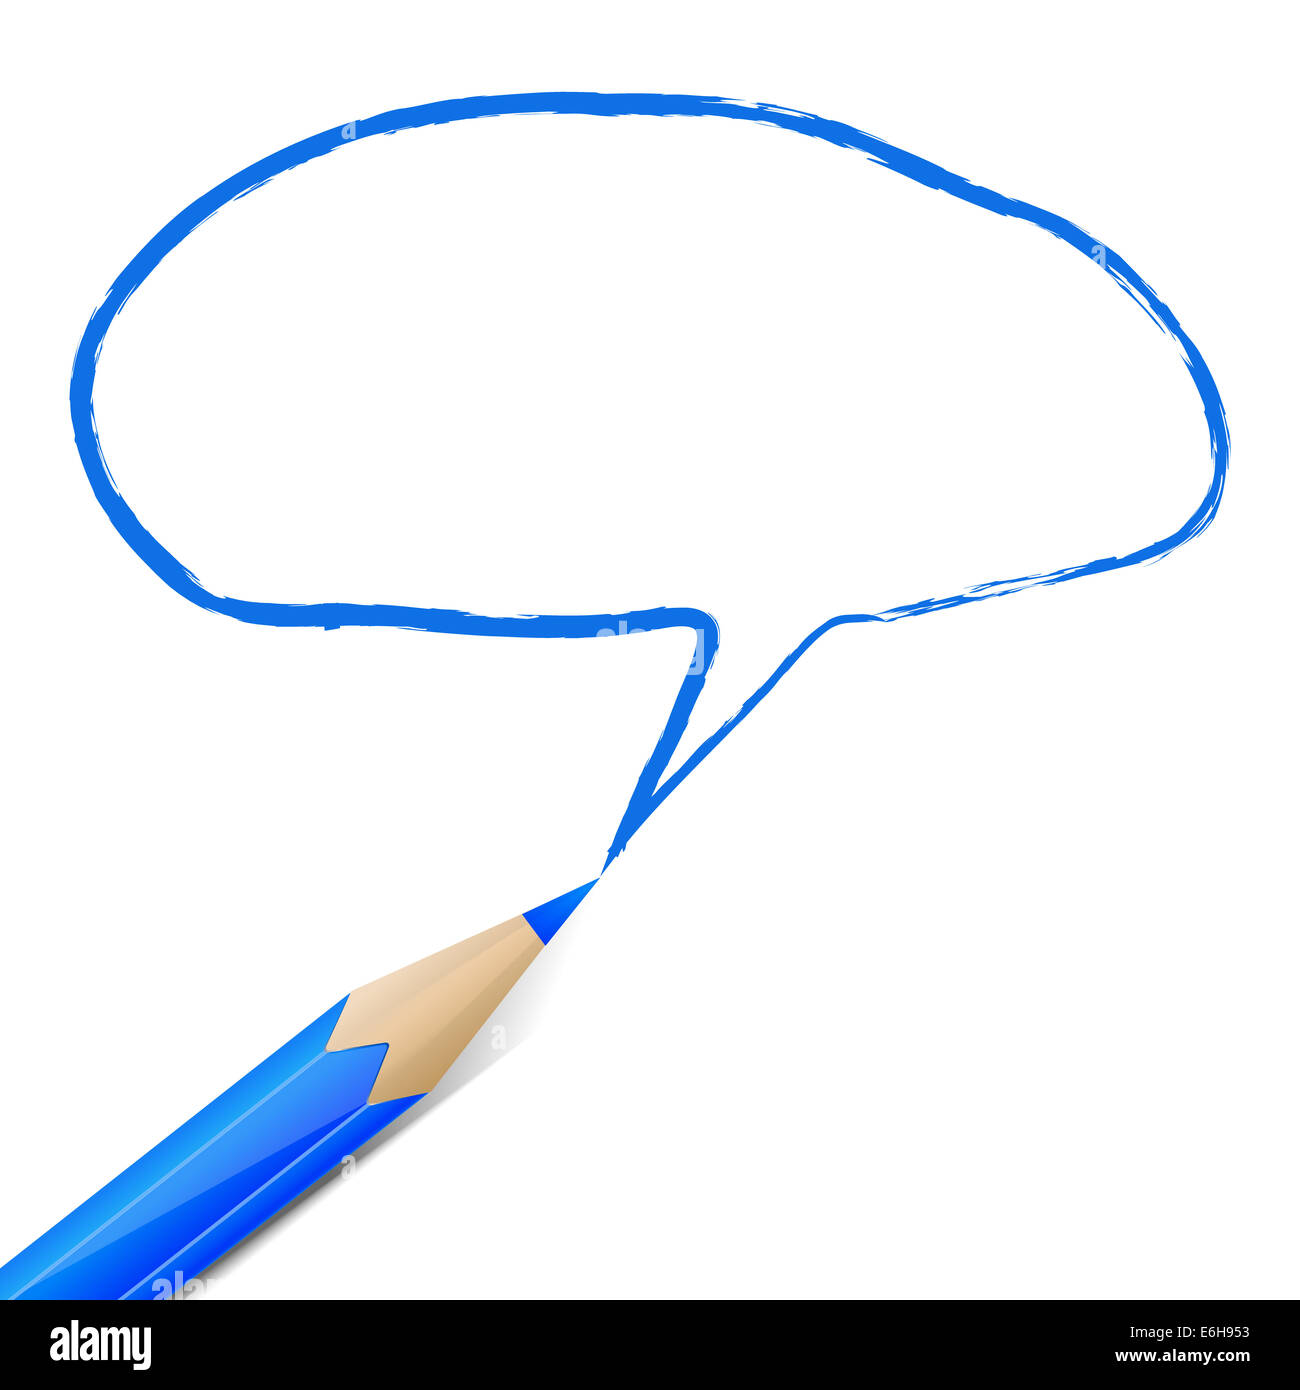 Blue speech bubble drawn with pencil Stock Photo